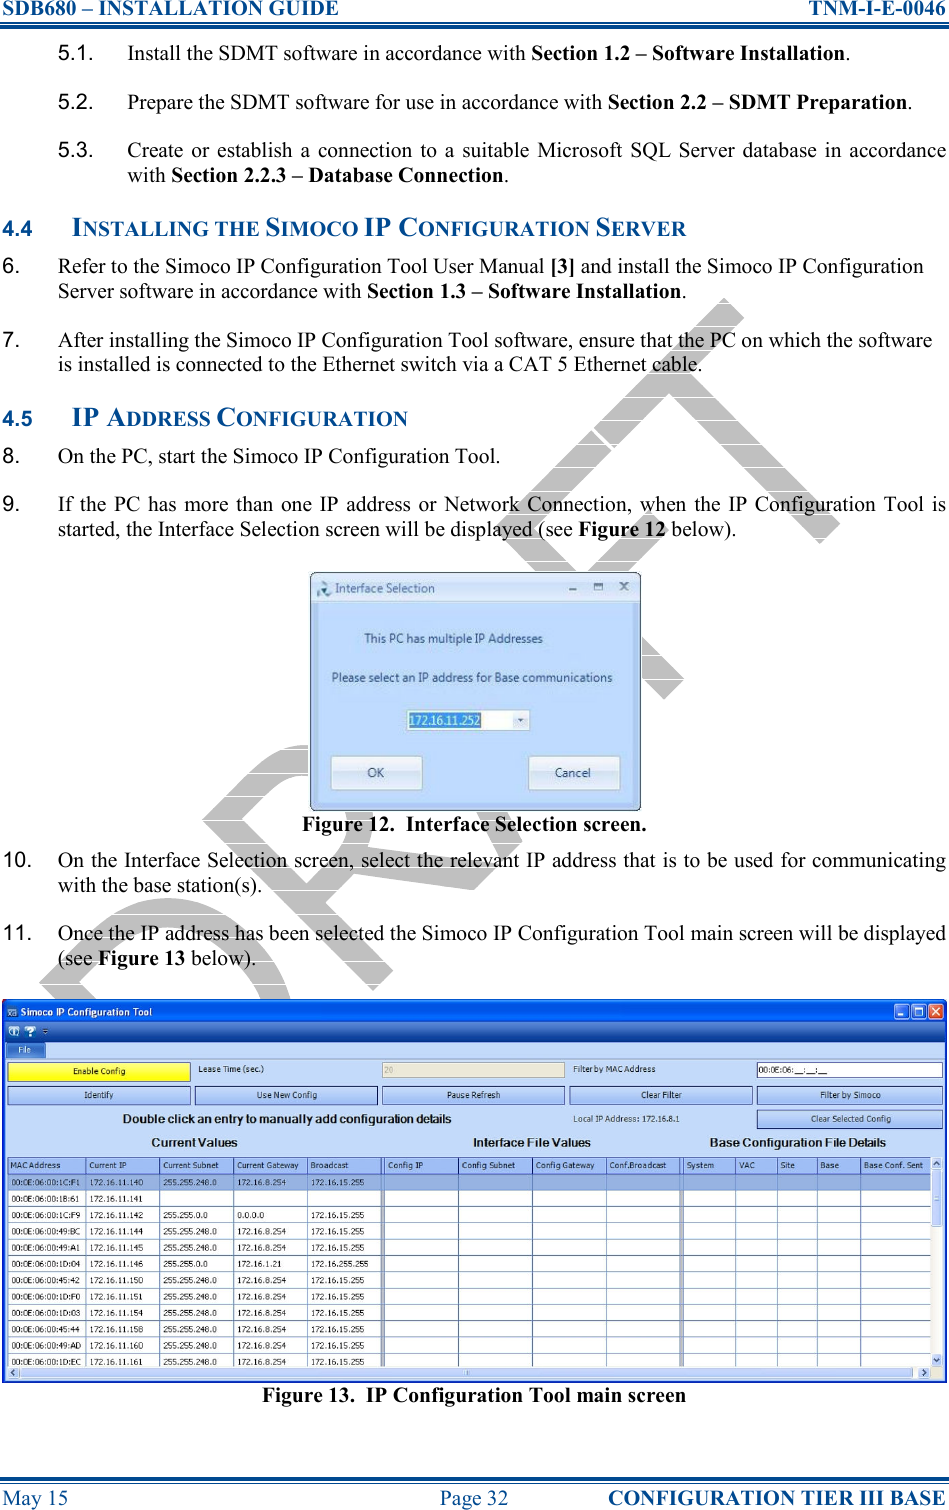 SDB680 – INSTALLATION GUIDE  TNM-I-E-0046 May 15  Page 32  CONFIGURATION TIER III BASE 5.1.  Install the SDMT software in accordance with Section 1.2 – Software Installation. 5.2.  Prepare the SDMT software for use in accordance with Section 2.2 – SDMT Preparation. 5.3.  Create or establish  a  connection to  a  suitable  Microsoft SQL Server database in  accordance with Section 2.2.3 – Database Connection. 4.4 INSTALLING THE SIMOCO IP CONFIGURATION SERVER 6.  Refer to the Simoco IP Configuration Tool User Manual [3] and install the Simoco IP Configuration Server software in accordance with Section 1.3 – Software Installation. 7.  After installing the Simoco IP Configuration Tool software, ensure that the PC on which the software is installed is connected to the Ethernet switch via a CAT 5 Ethernet cable. 4.5 IP ADDRESS CONFIGURATION 8.  On the PC, start the Simoco IP Configuration Tool. 9.  If the  PC  has  more than  one IP address or  Network Connection,  when  the  IP Configuration  Tool  is started, the Interface Selection screen will be displayed (see Figure 12 below). Figure 12.  Interface Selection screen. 10.  On the Interface Selection screen, select the relevant IP address that is to be used for communicating with the base station(s). 11.  Once the IP address has been selected the Simoco IP Configuration Tool main screen will be displayed (see Figure 13 below). Figure 13.  IP Configuration Tool main screen 